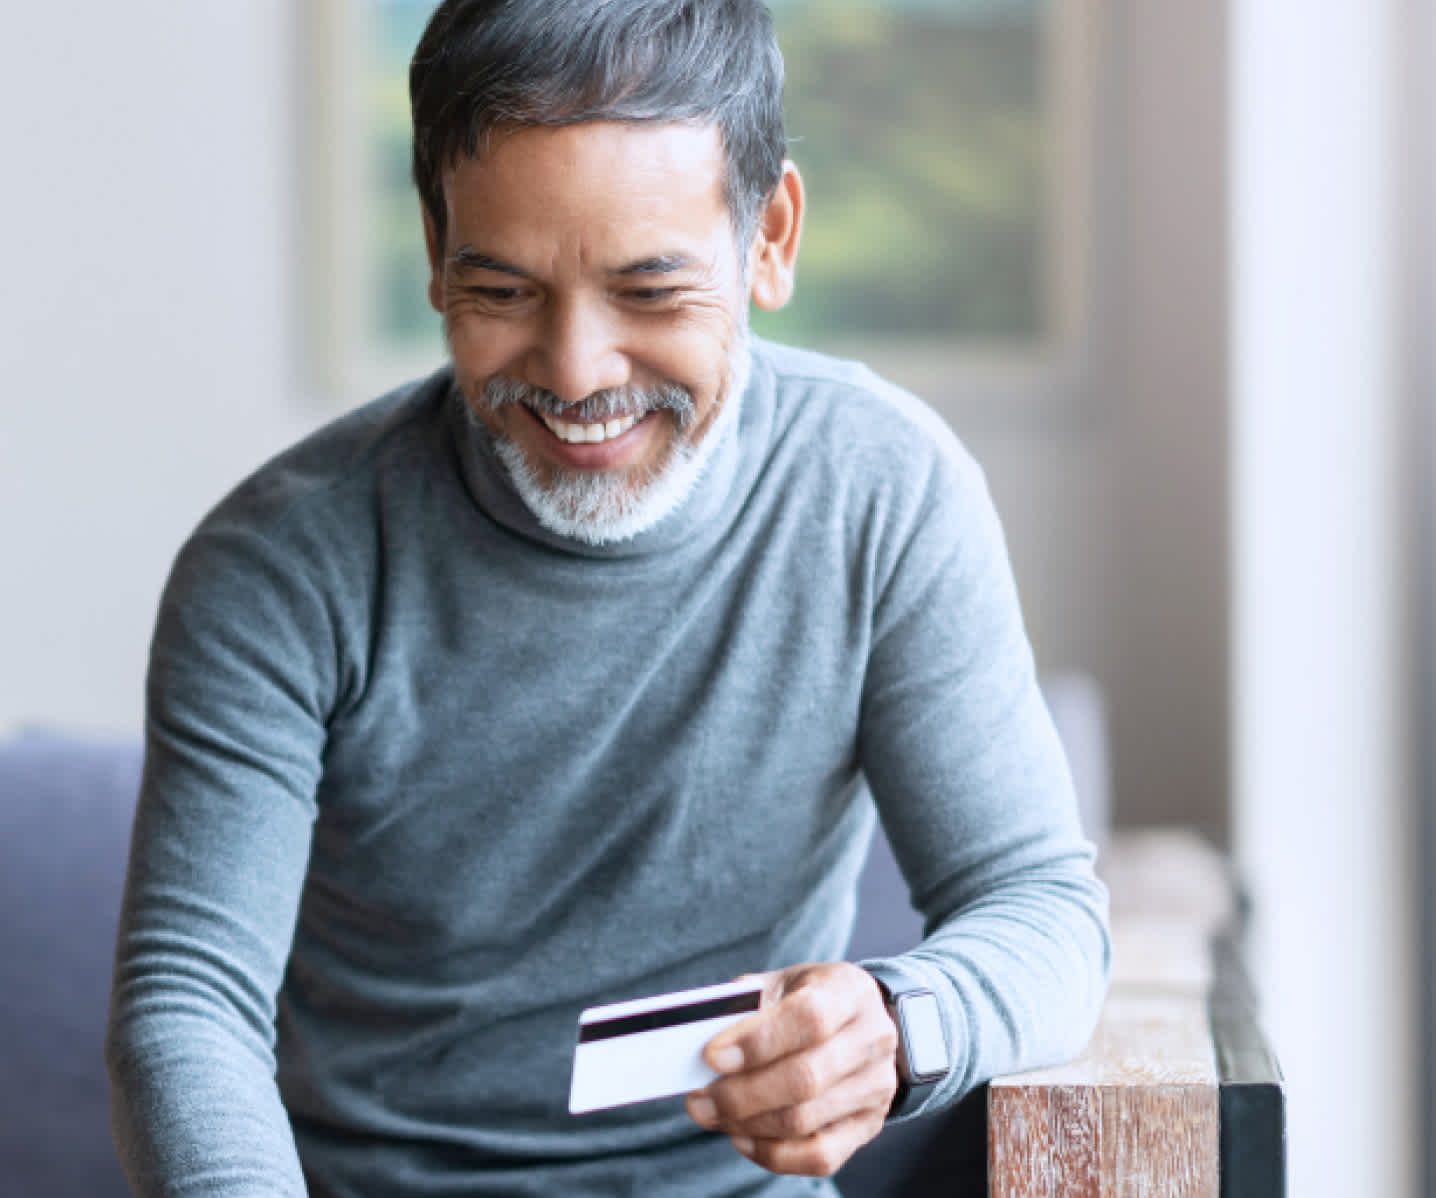 Man smiling while holding credit card